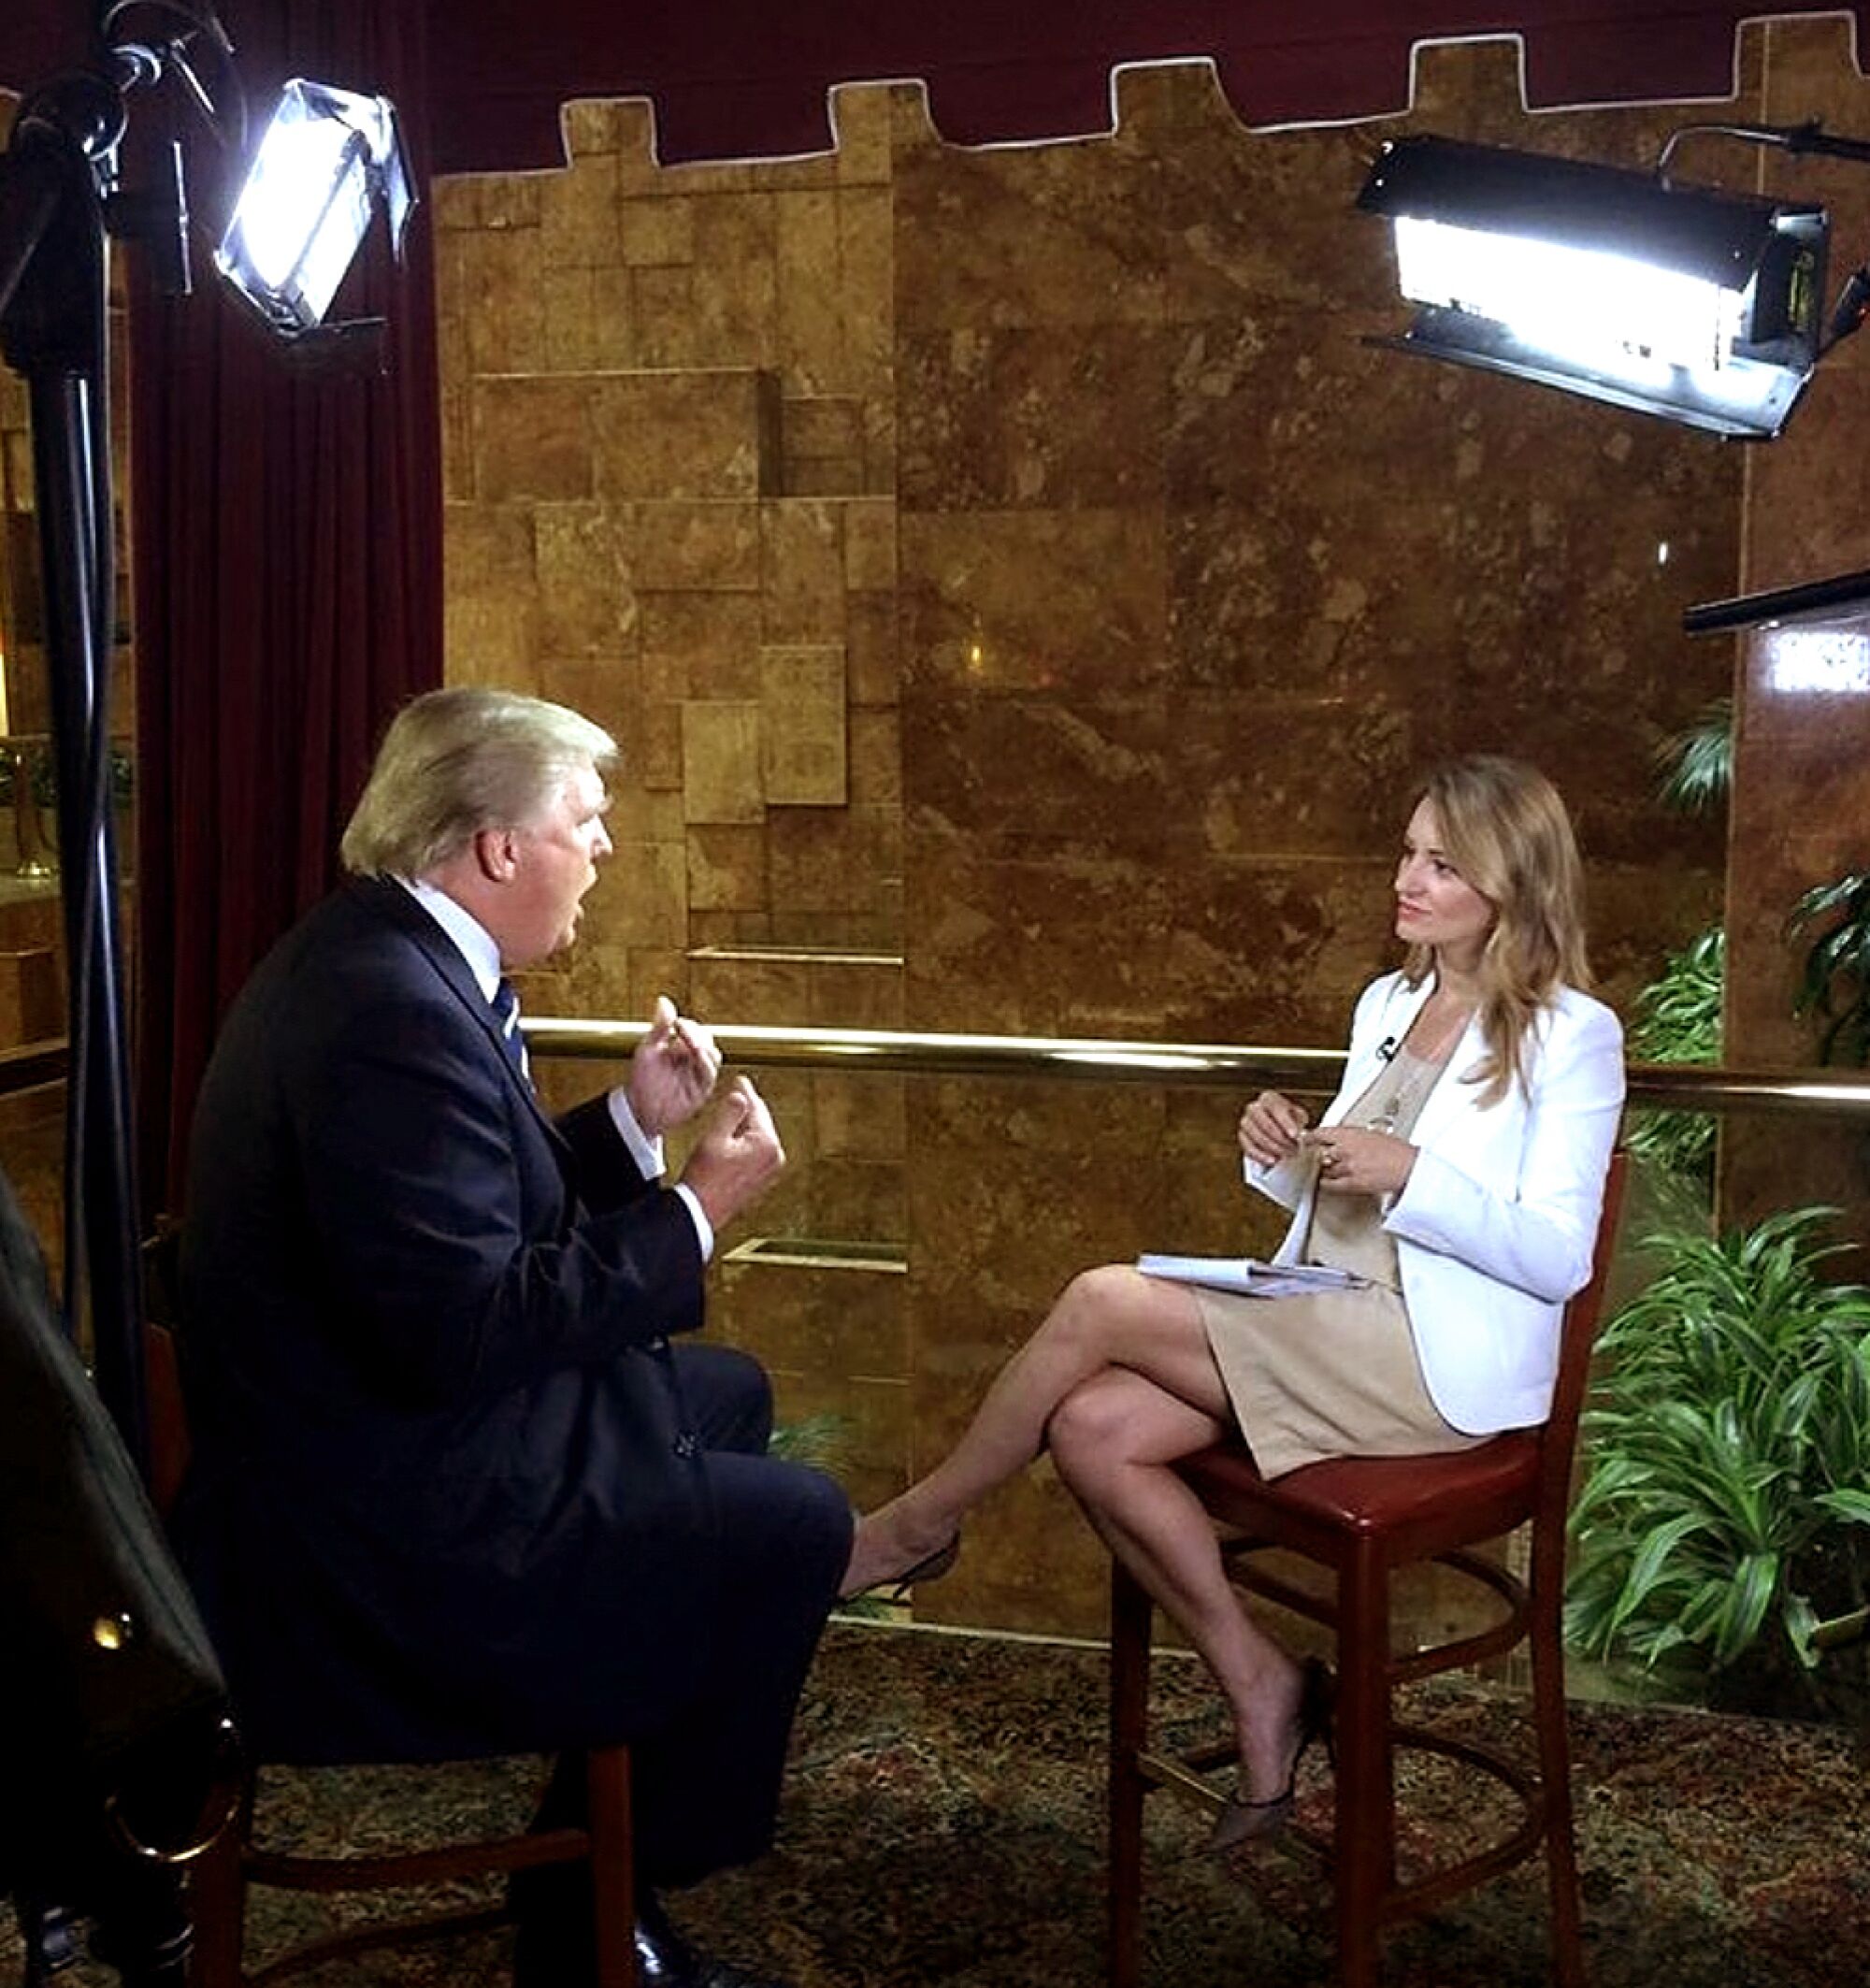 Tur interviewing presidential candidate Donald Trump in July 2015.